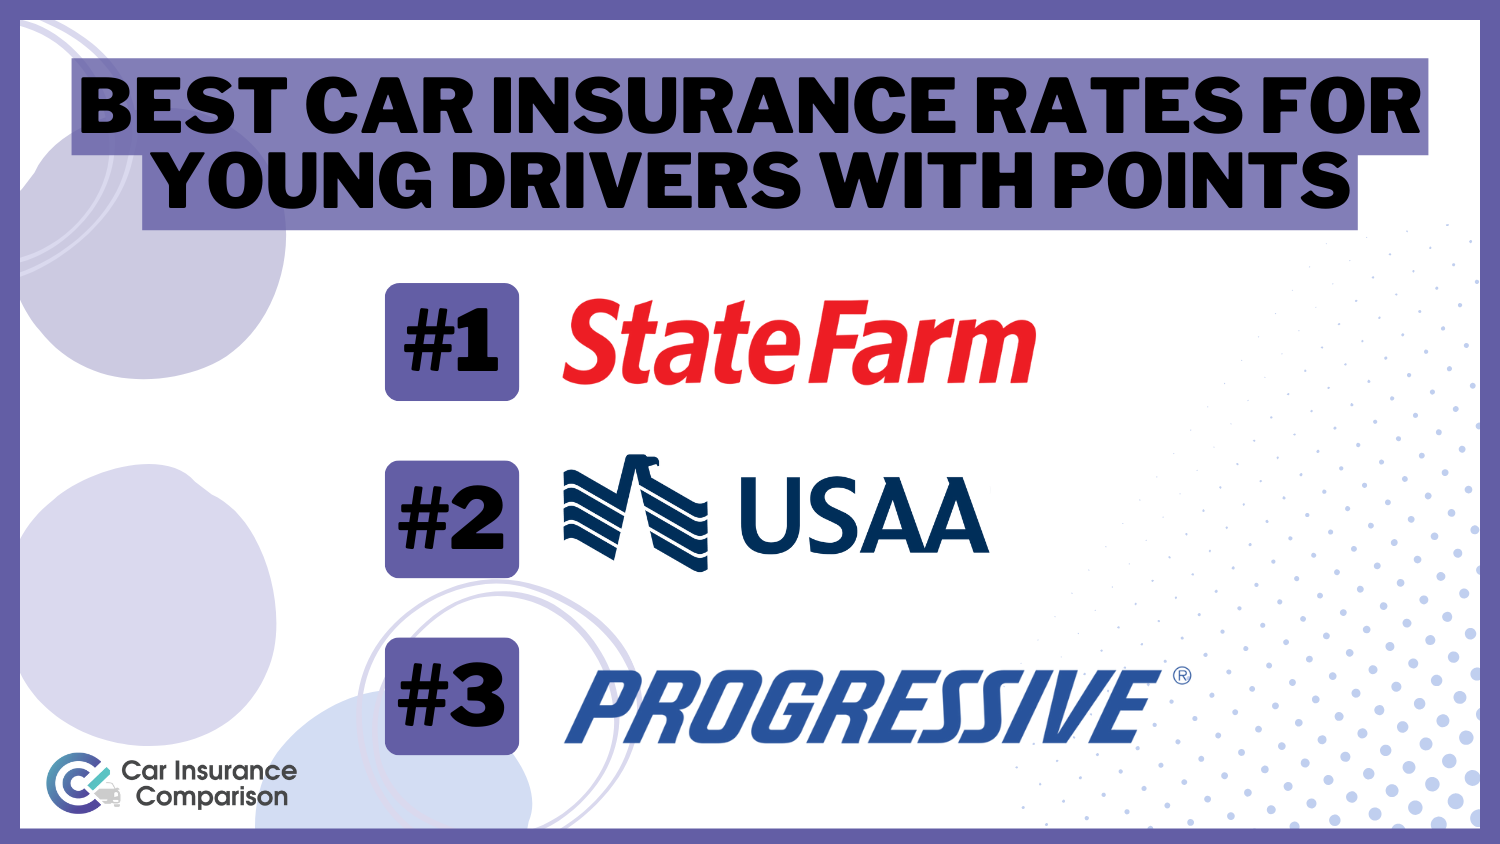 State Farm, USAA, and Progressive: Best Car Insurance Rates for Young Drivers With Points